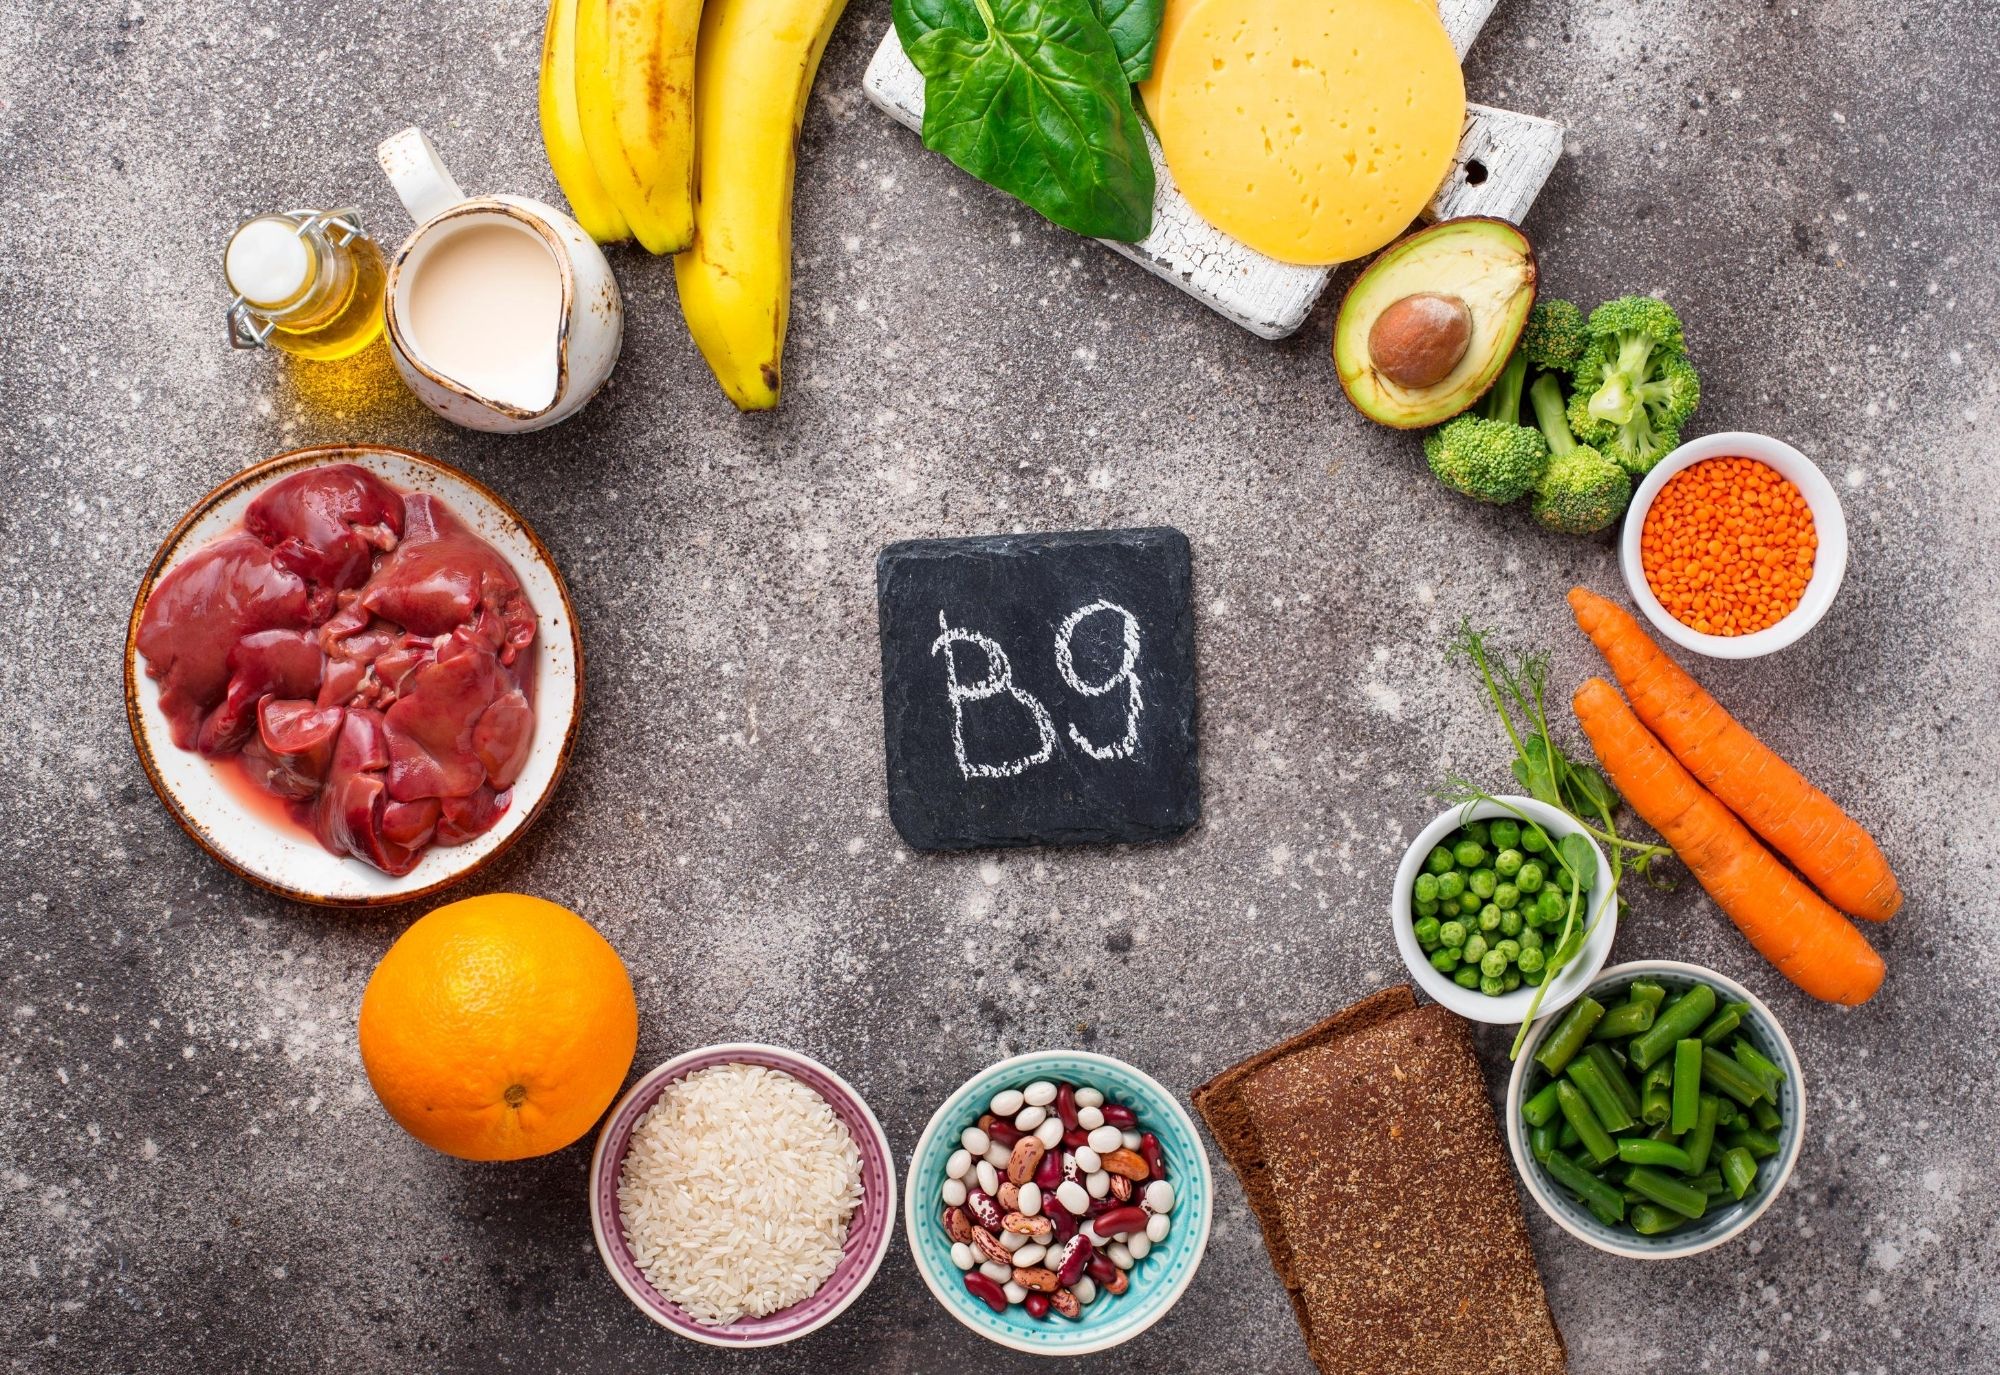 Vitamin B9 And Disease Prevention Articles 4 Business